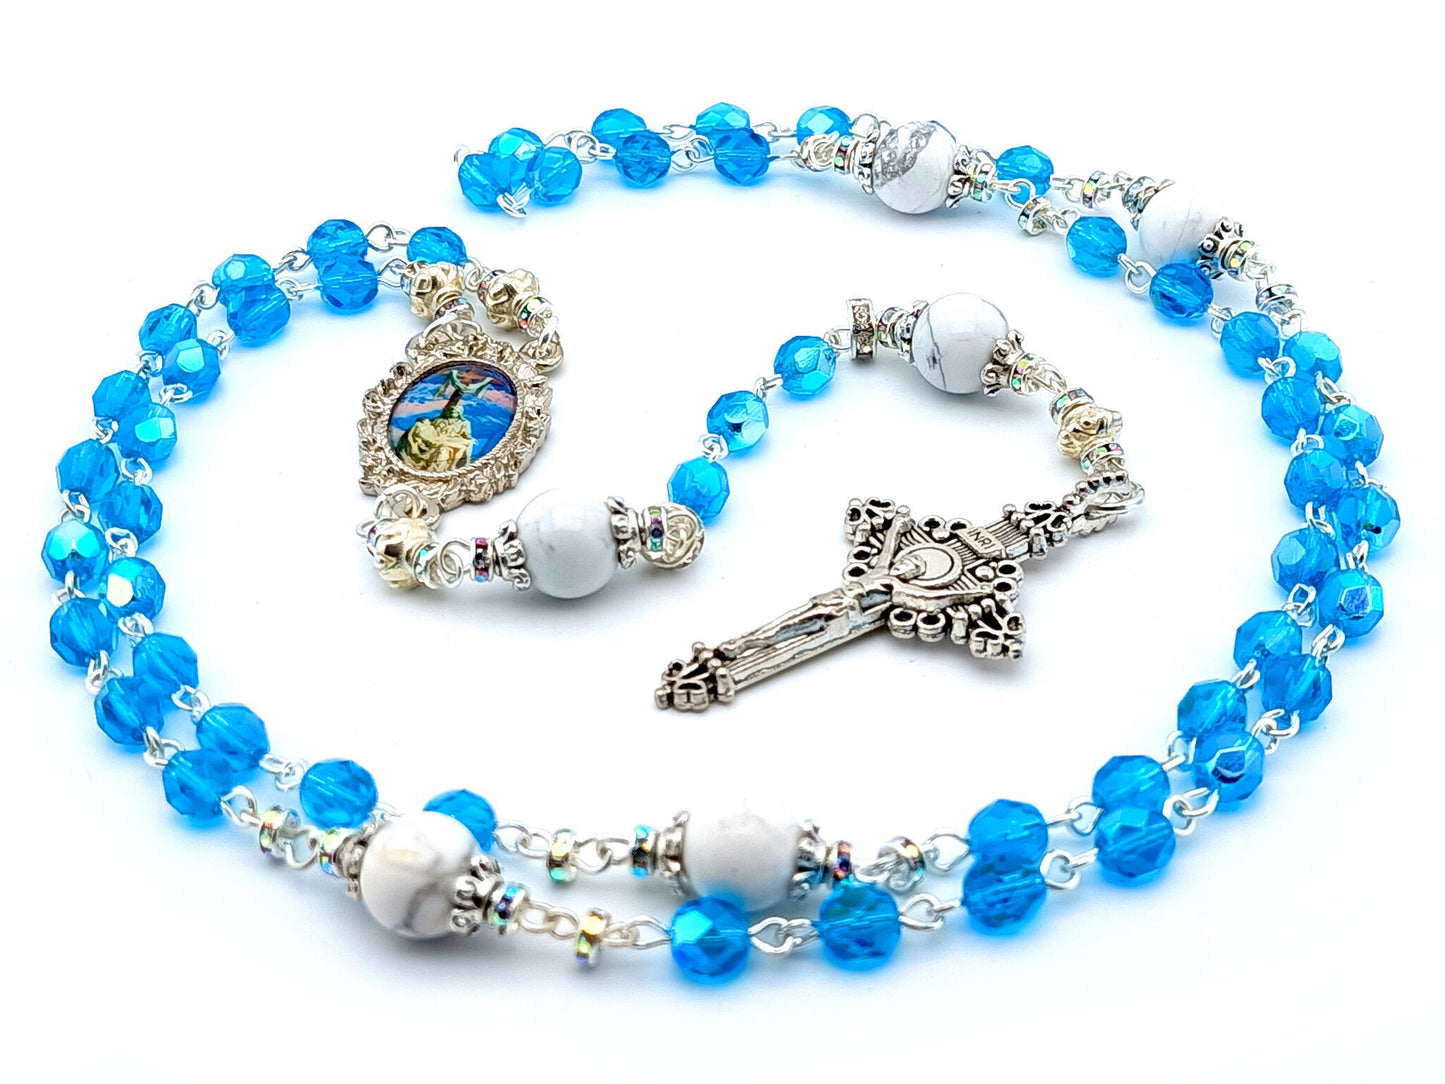 The Crucifixion unique rosary beads with blue faceted glass beads, silver crucifix and picture centre medal.